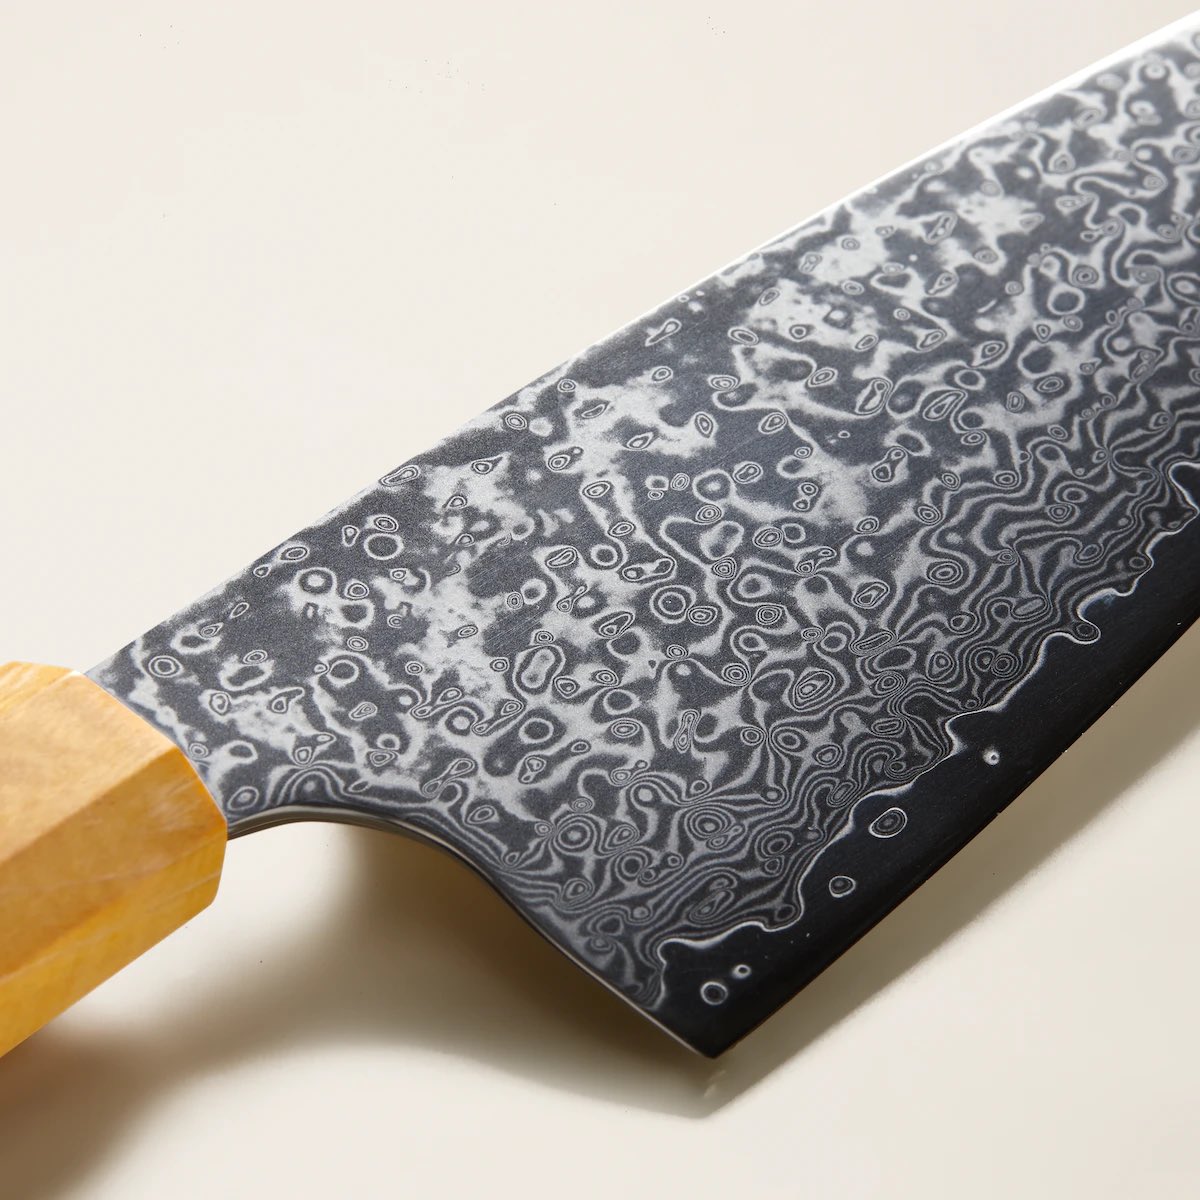 Success! I finally nabbed the @italic Japanese chefs knife. Best day ever.